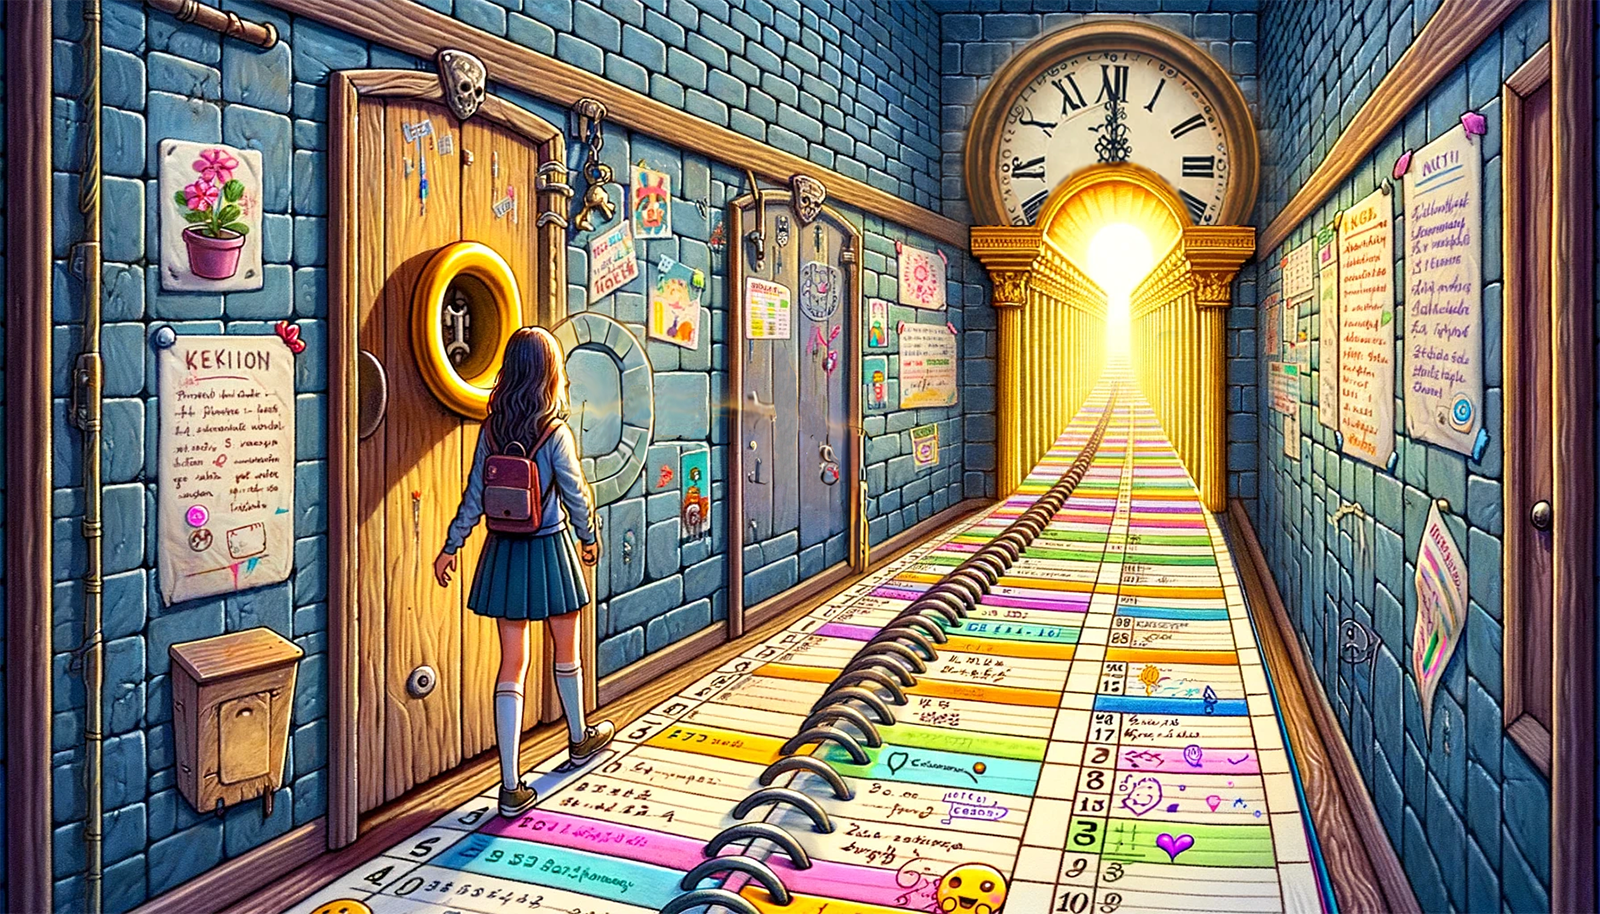 An illustration depicts a young female high school student standing at the threshold of a half-open medieval dungeon cell door. She gazes into a corridor that stretches into a bright light. The corridor floor is creatively transformed into a colorful day planner, full of playful notations, emoji-style doodles, and vibrant shades, symbolizing organization and time management. The walls blend the stone of a dungeon with a school-like setting, adorned with cheerful posters and doodles, merging academic and fantastical themes. Above the door, an ornate clock hangs, its time pointing towards a future. The light at the end of the corridor suggests hope and the promise of a well-managed, brighter path ahead.